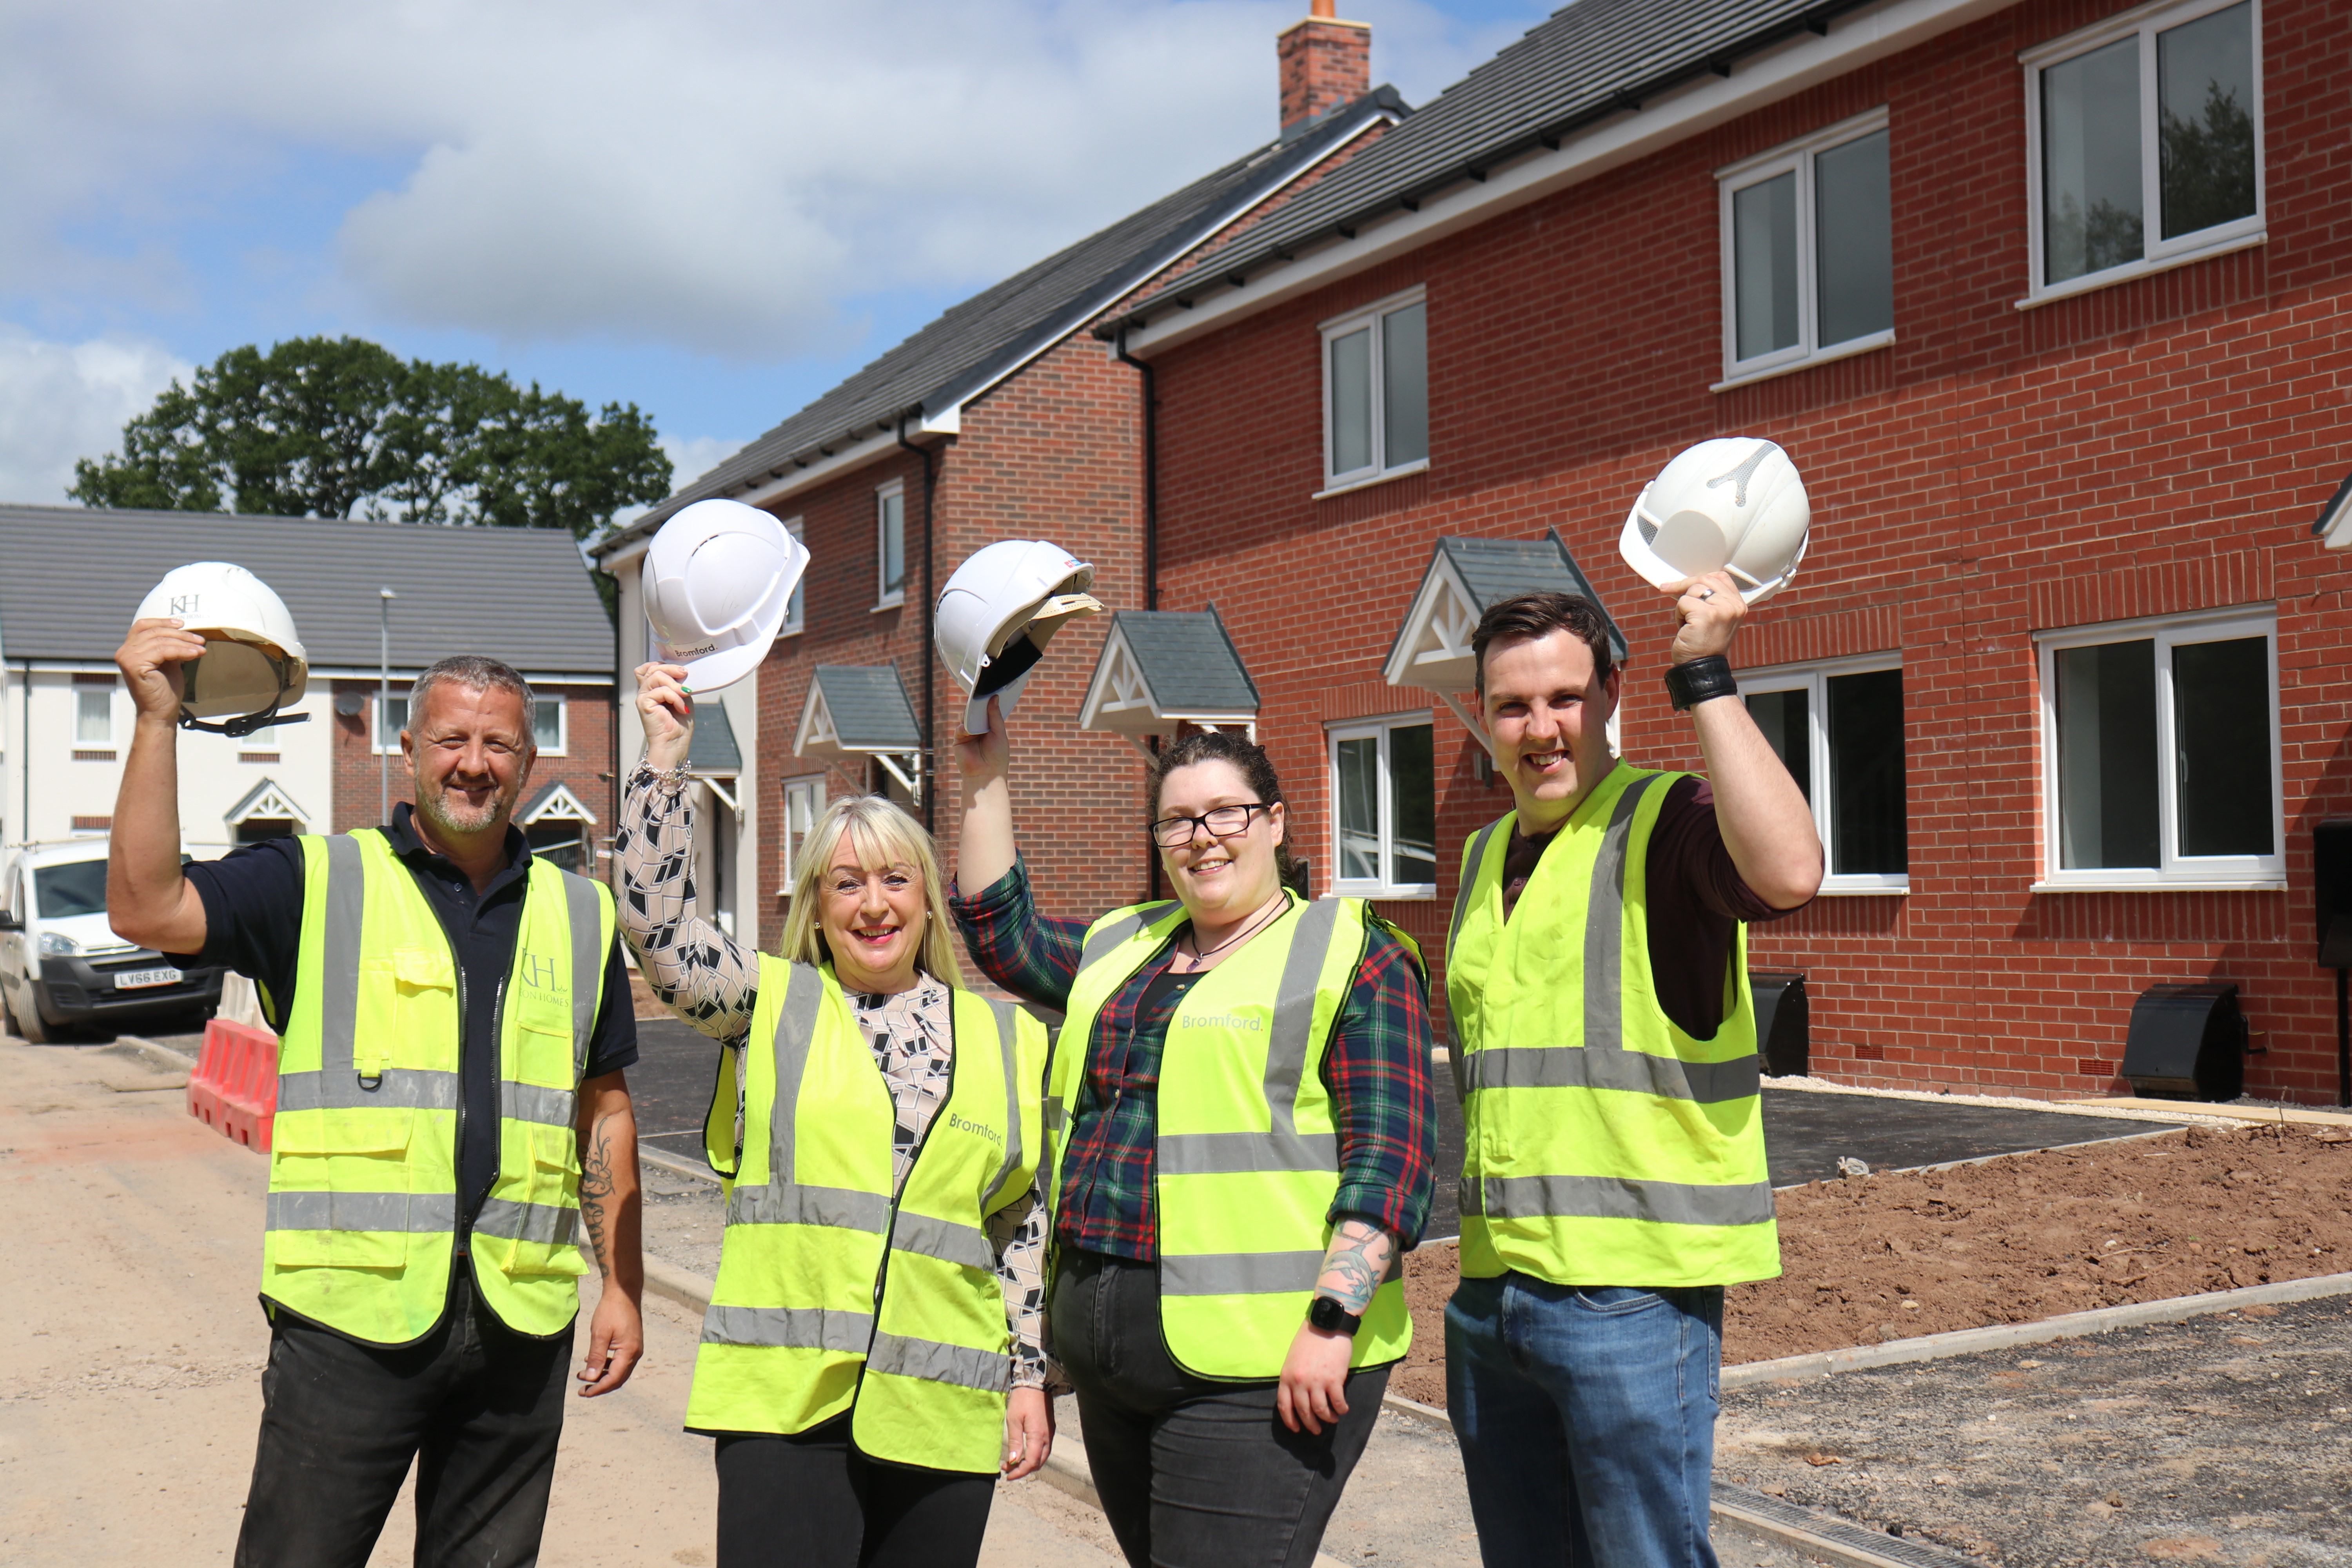 Steve Wood, Tracey Brewer, Rachel Phillips, and Connor Williams celebrate the new homes in Telford